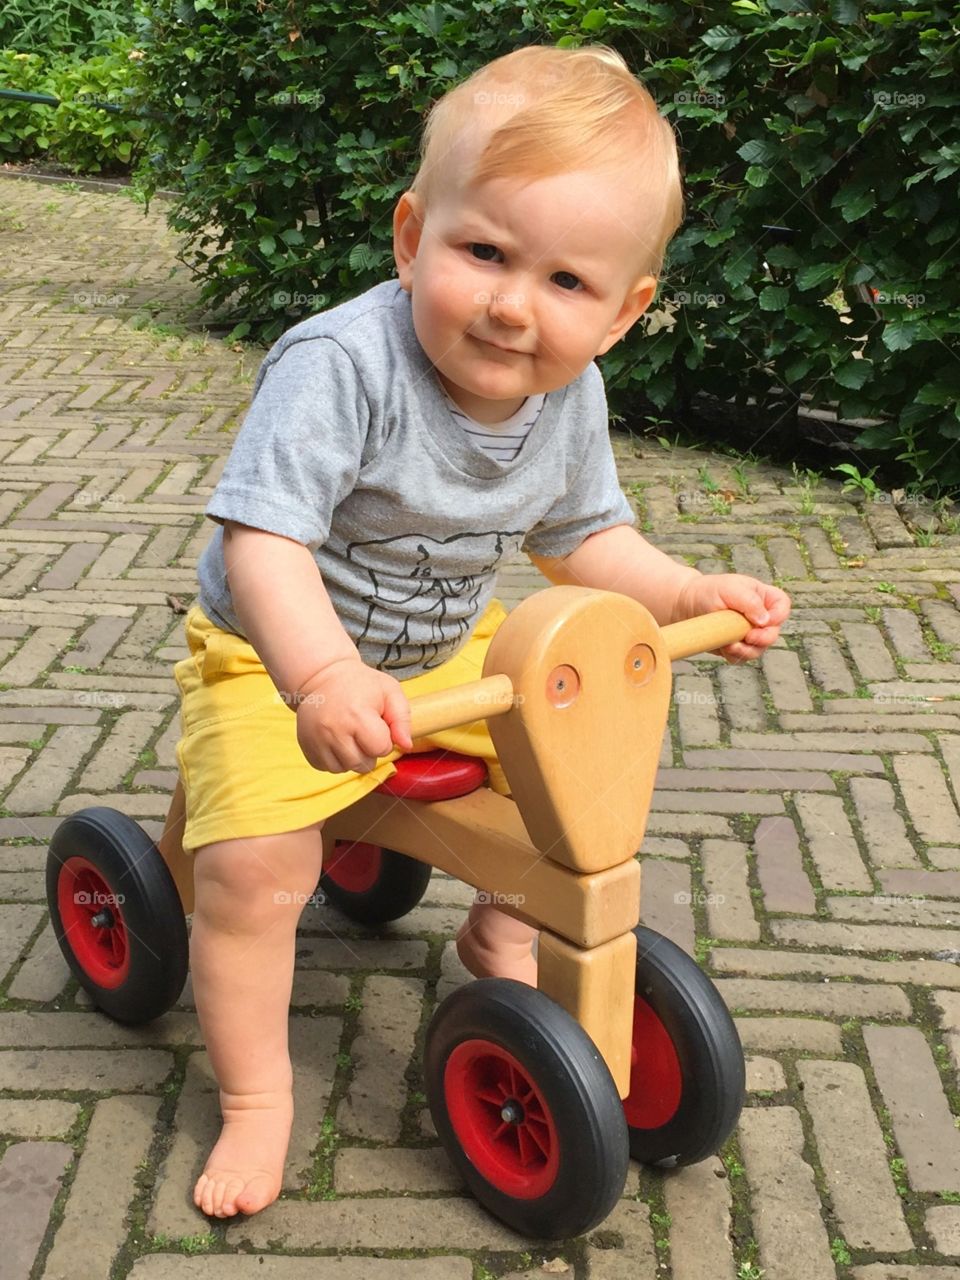 Floris first time outside on his bicycle!